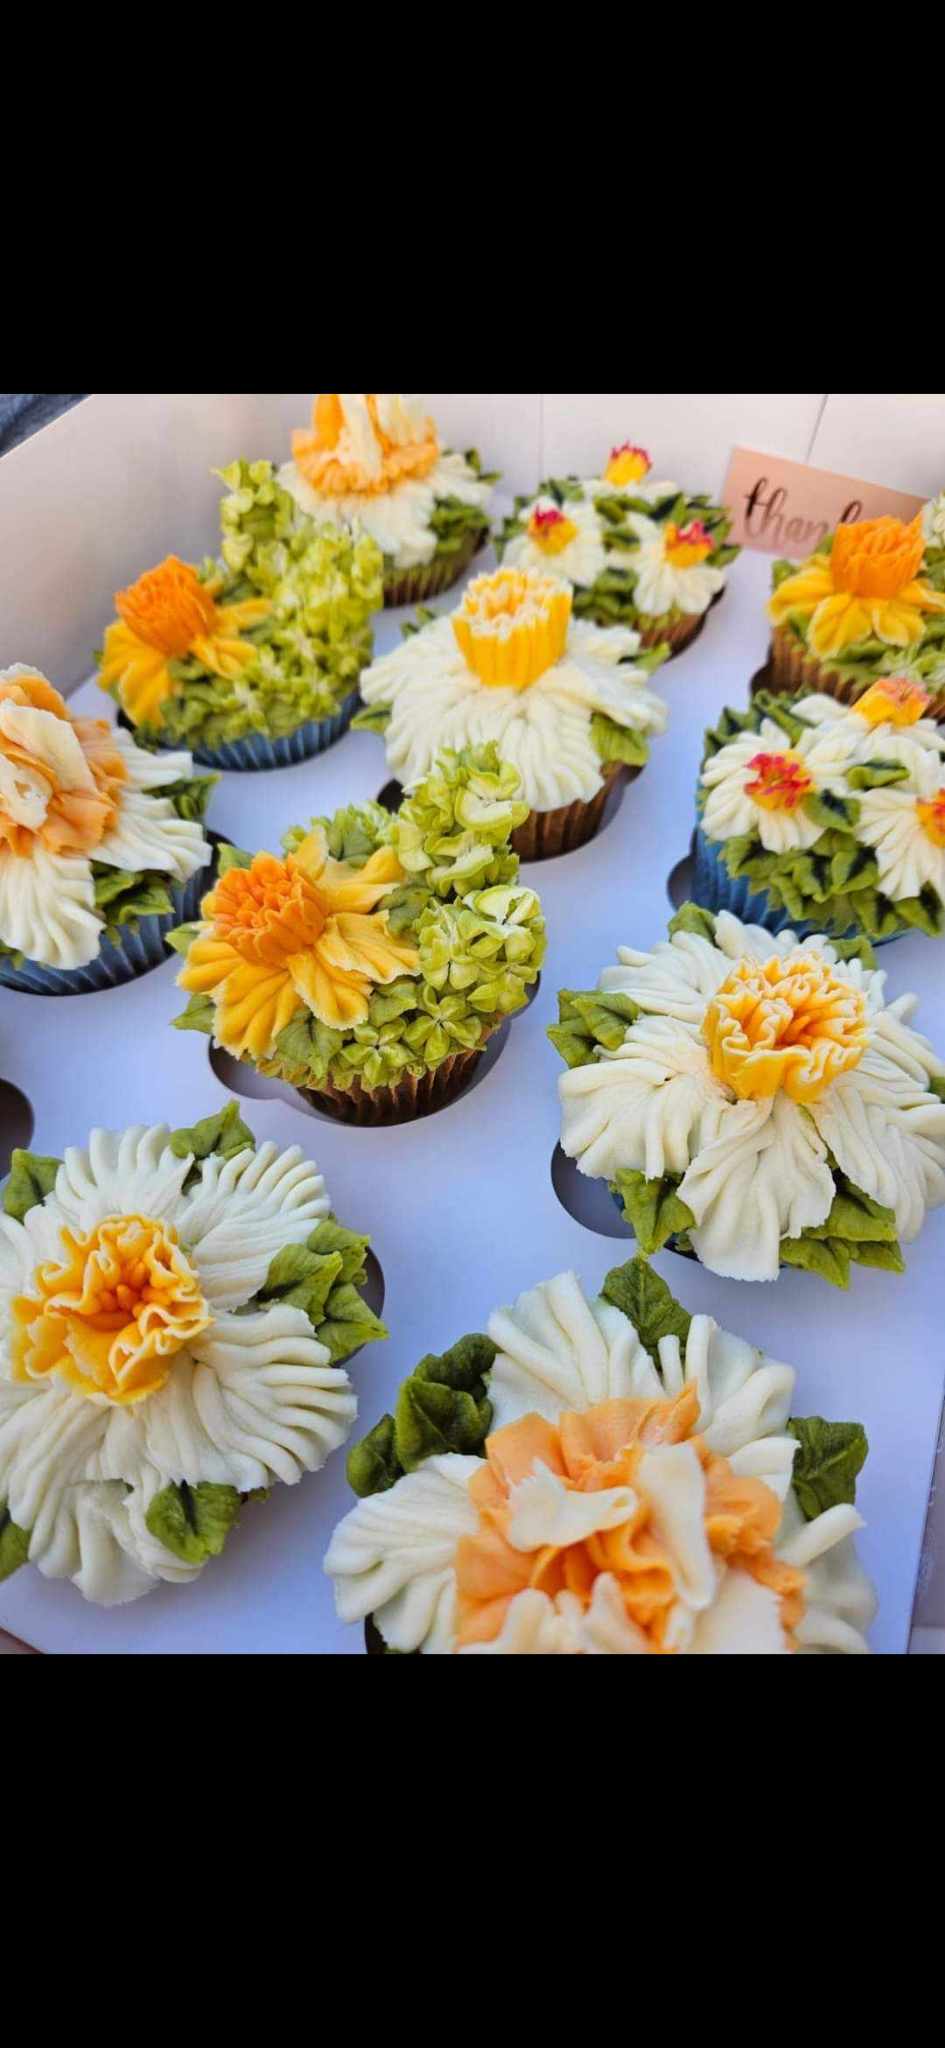 Cupcake boxes.  Here are some beautiful hand piped daffodils